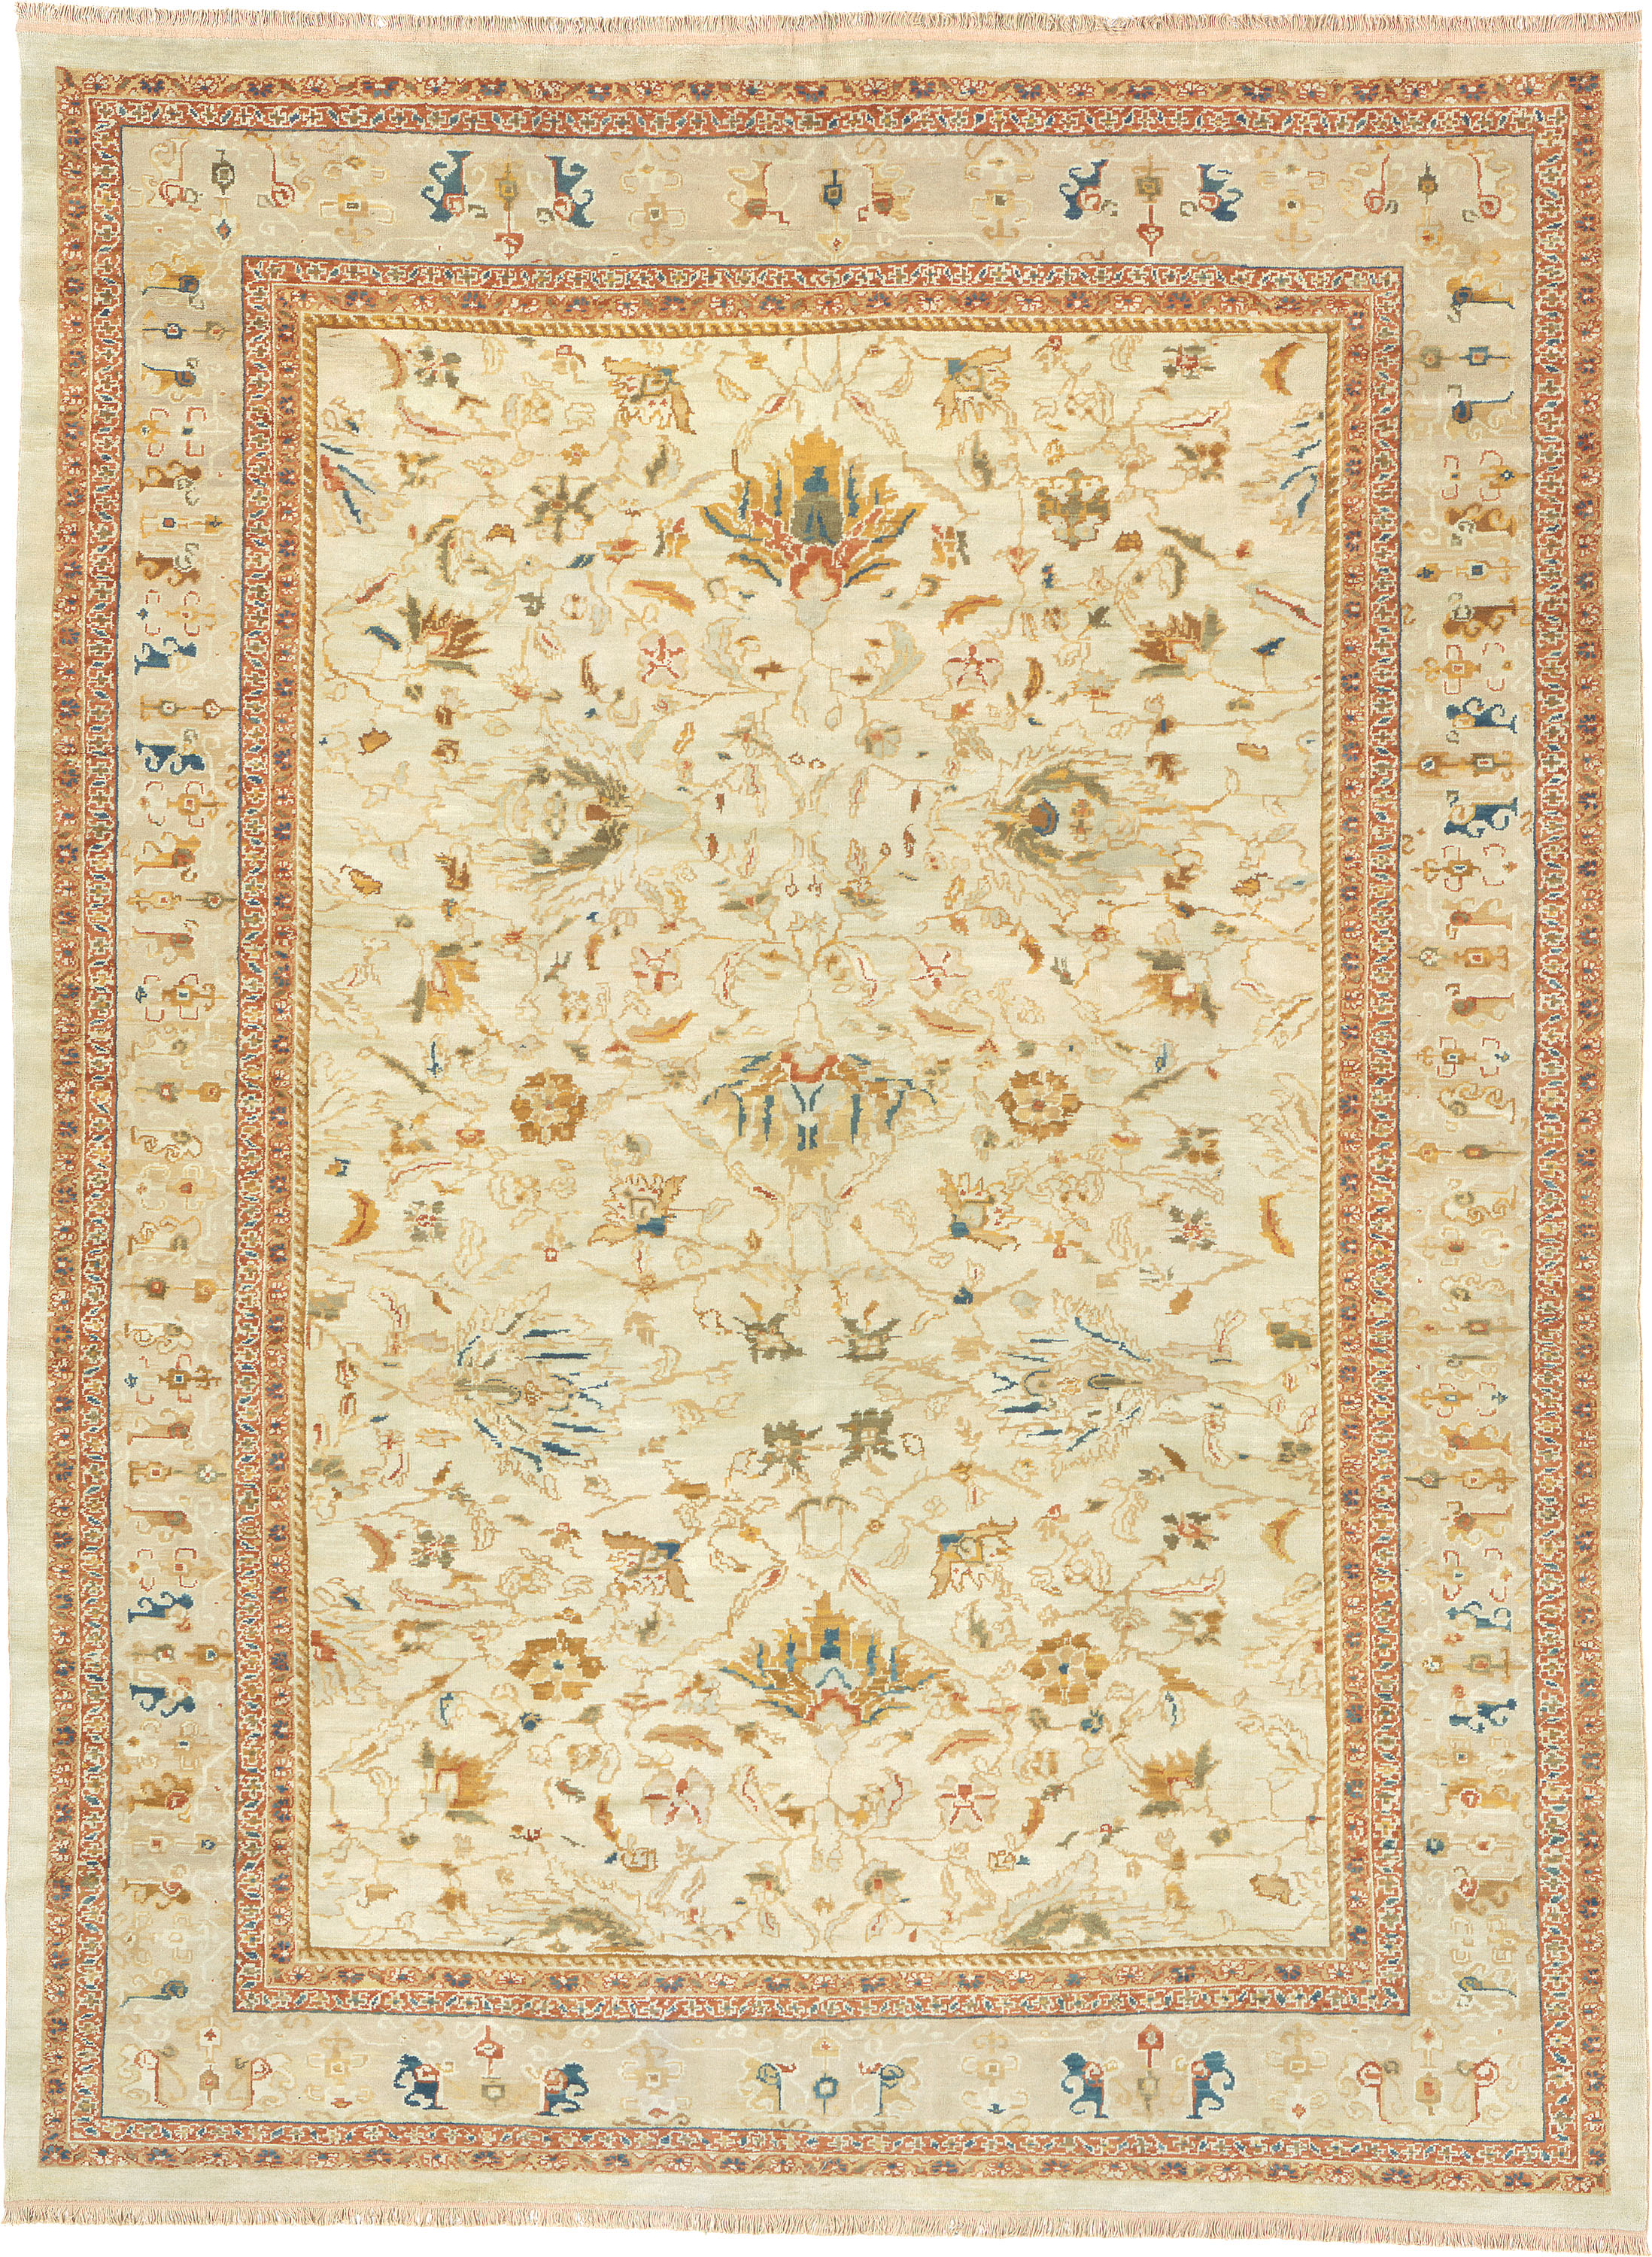 Afternoon Rose Design | Custom Traditional Carpet | FJ Hakimian | Carpet Gallery in NY